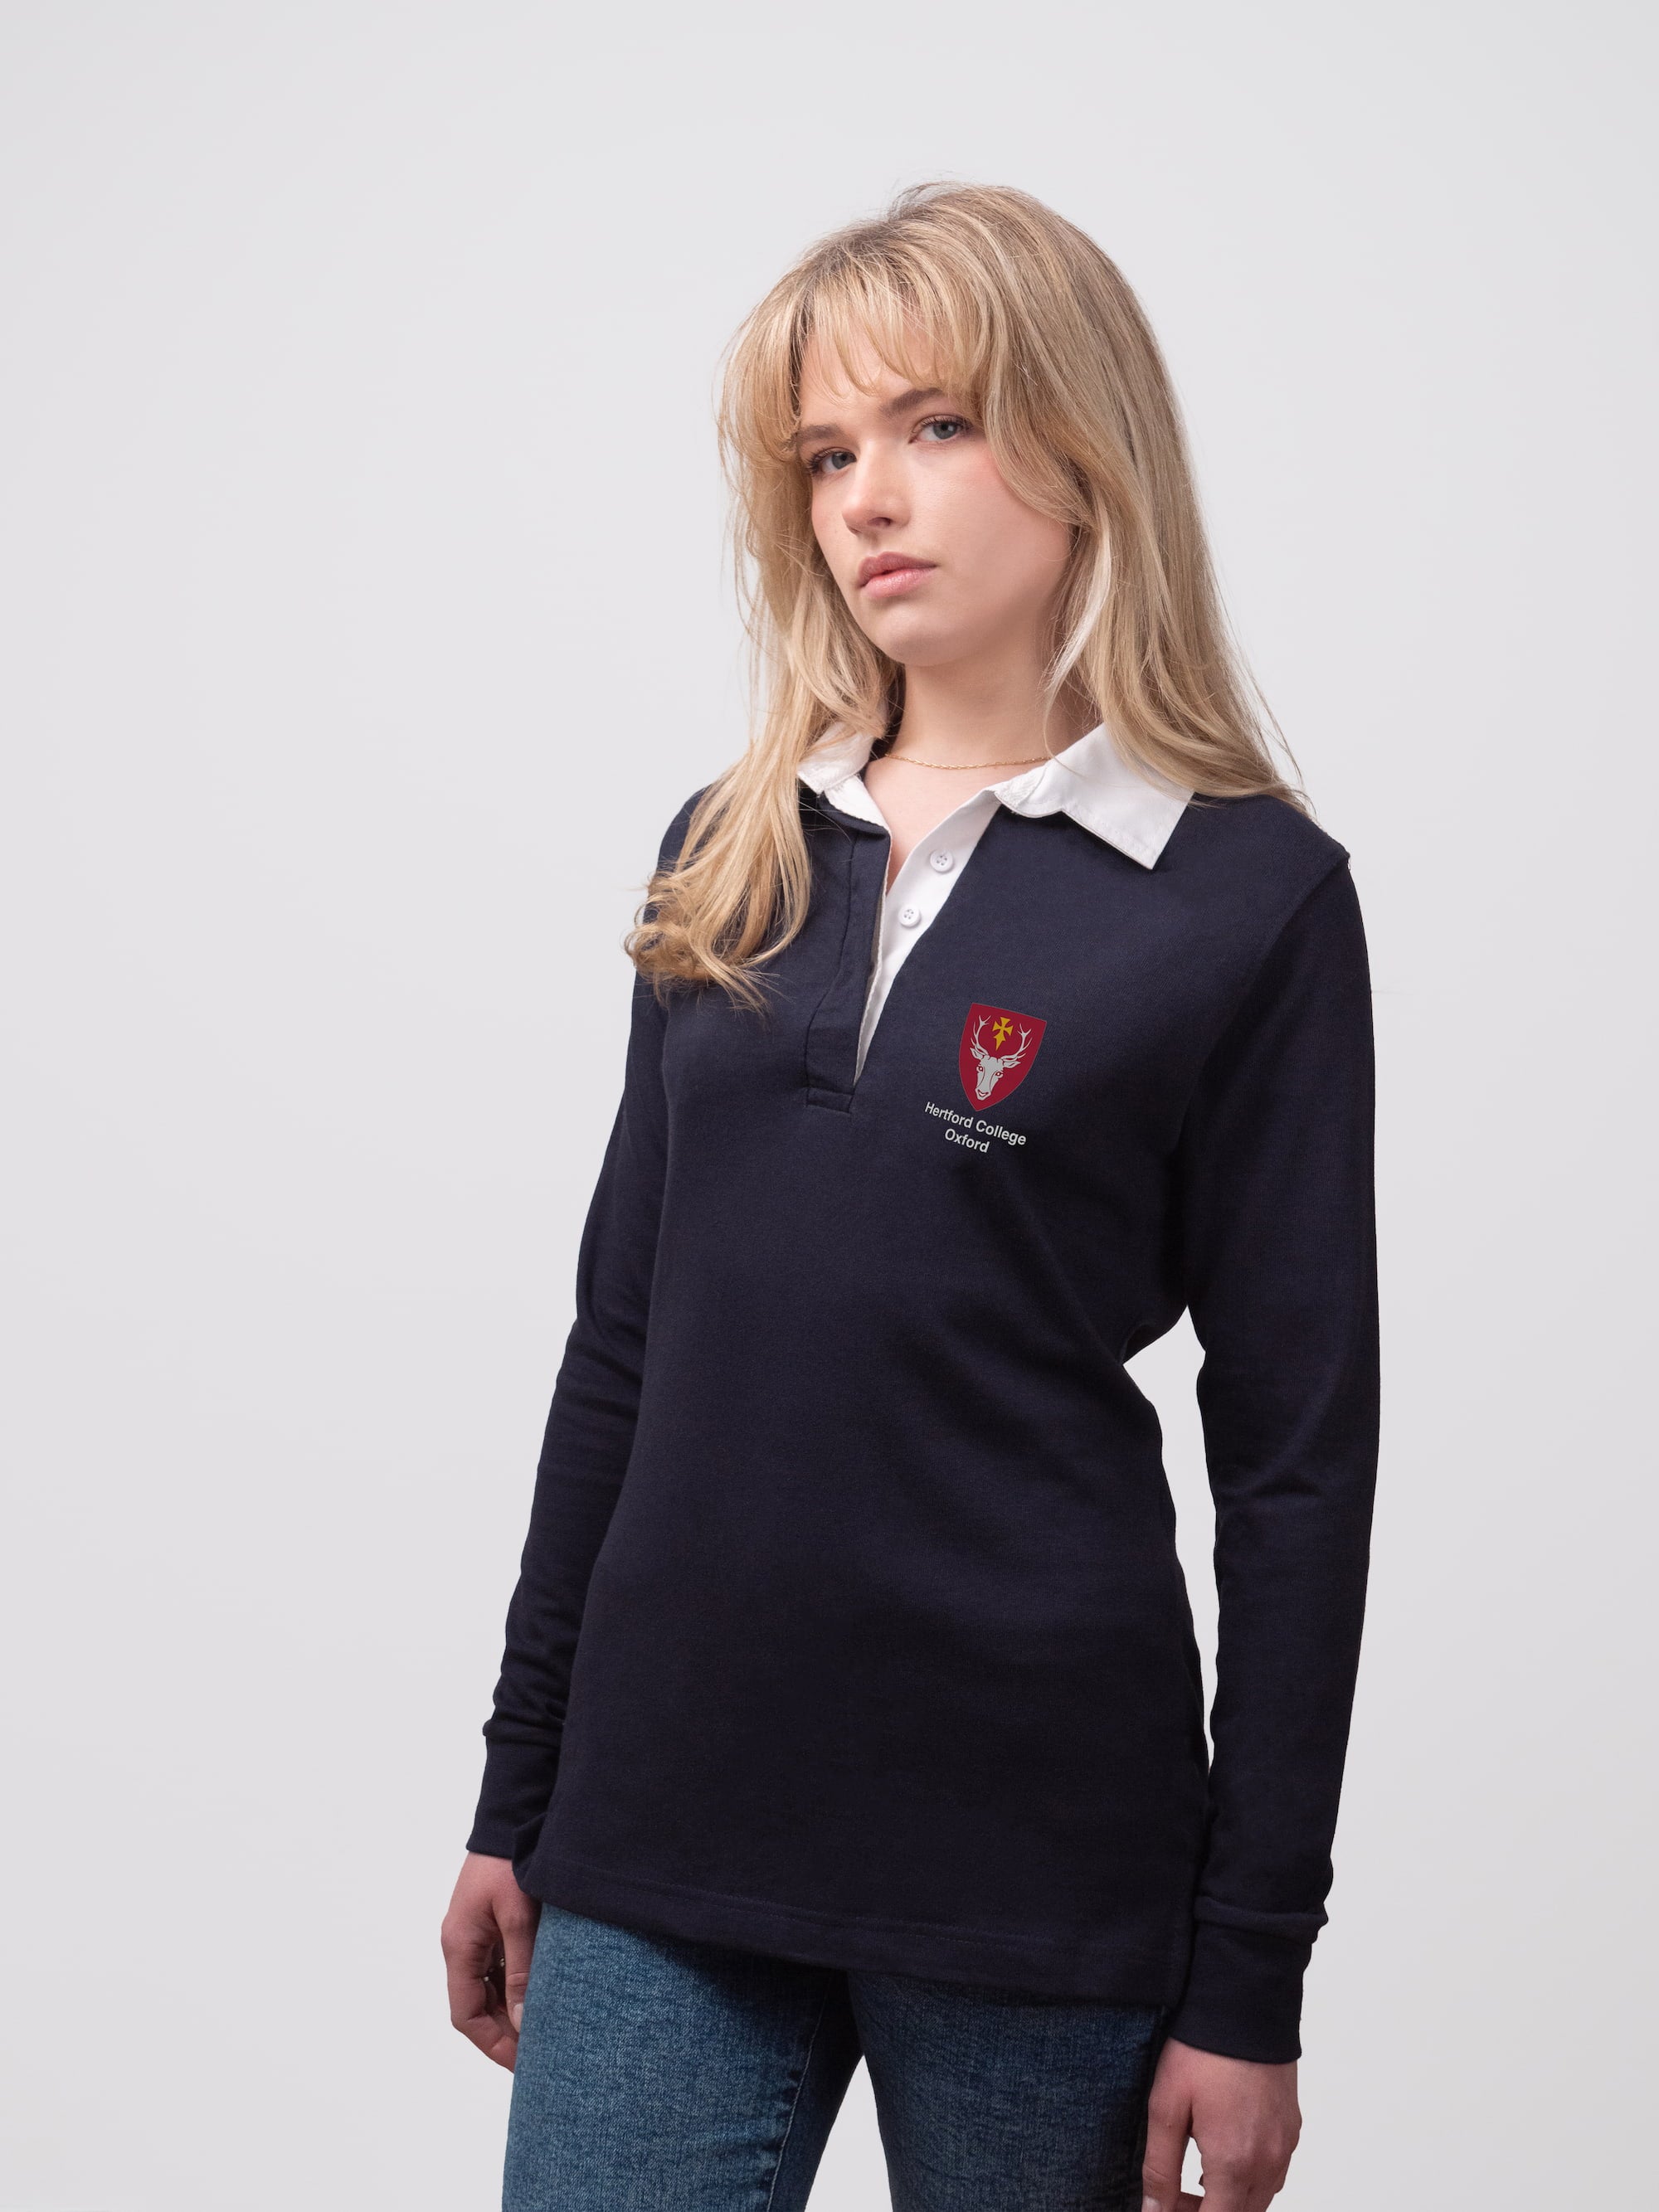 Student wearing a navy Hertford College rugby shirt with embroidered crest